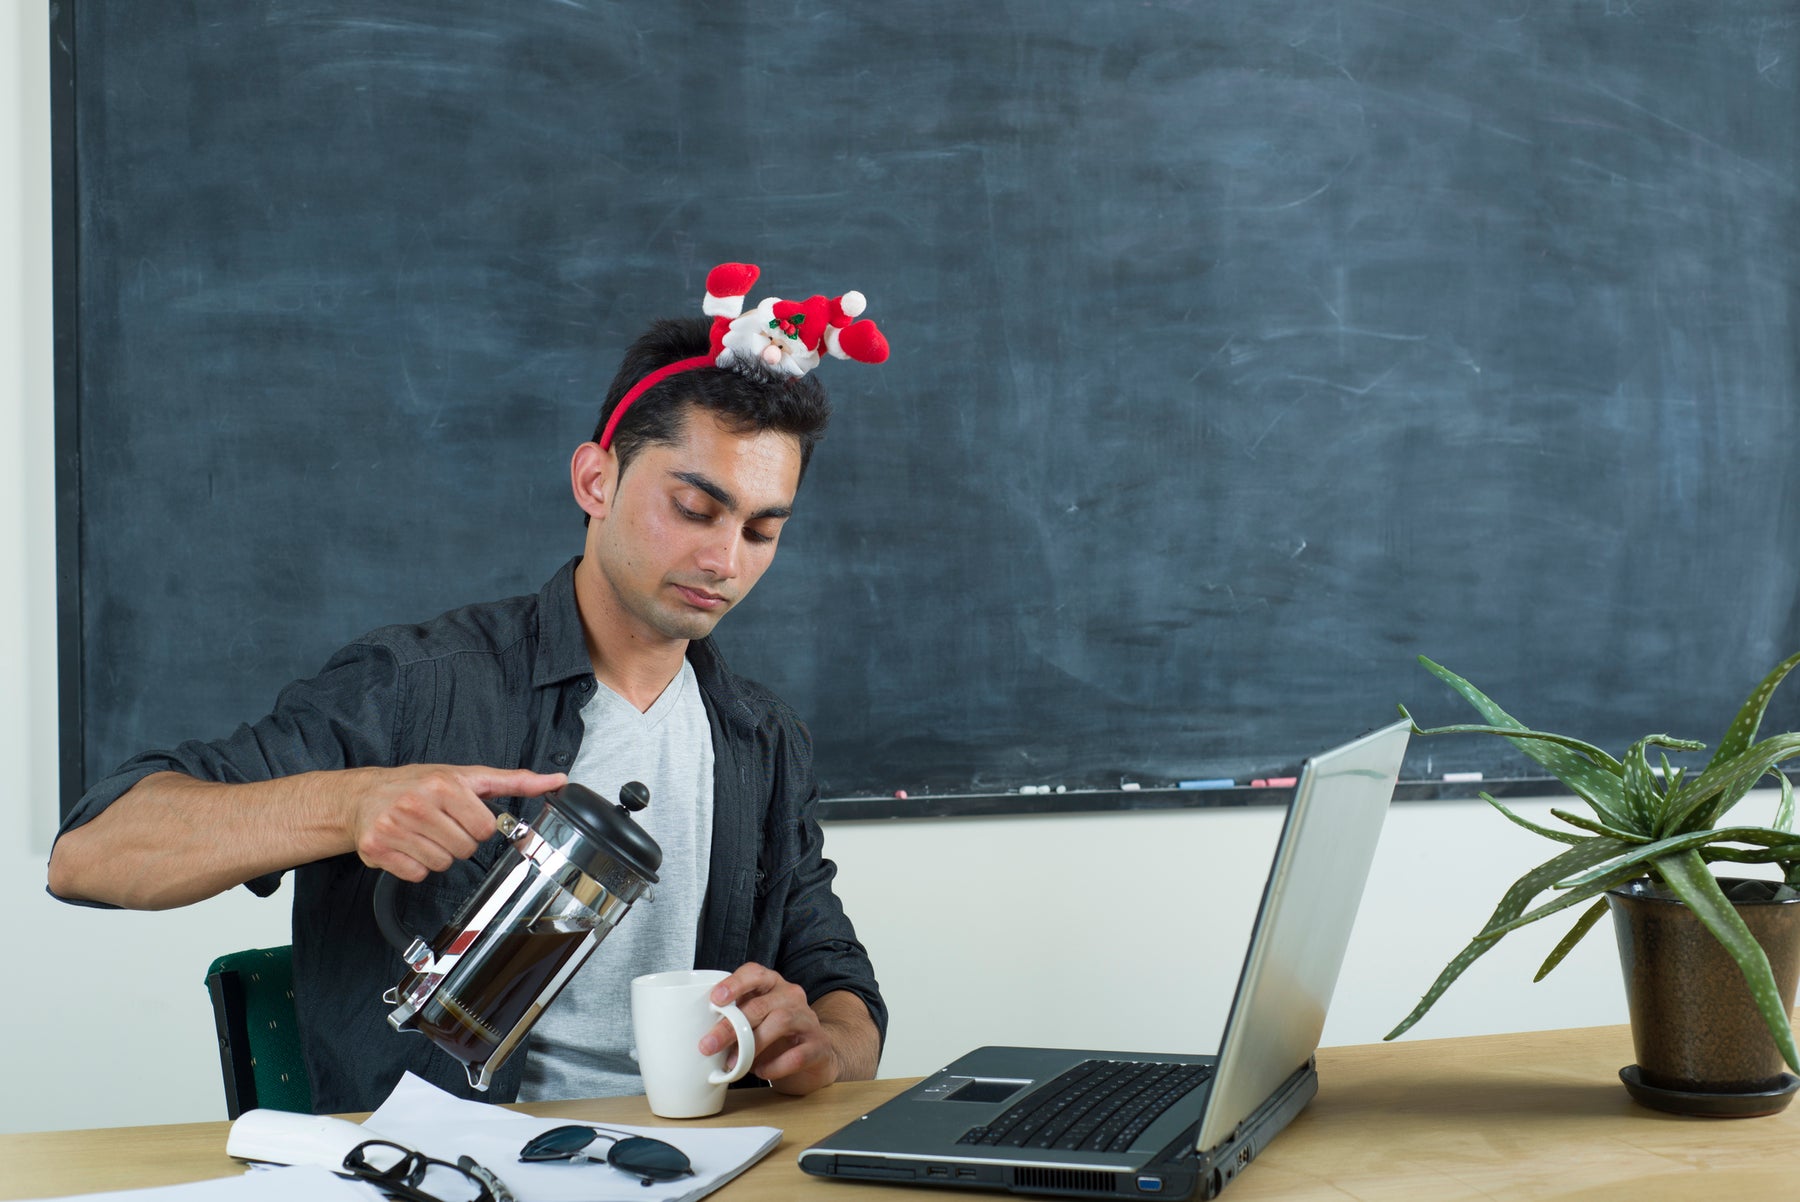 6 tips to ease teacher stress in the run-up to Christmas - A guest blog